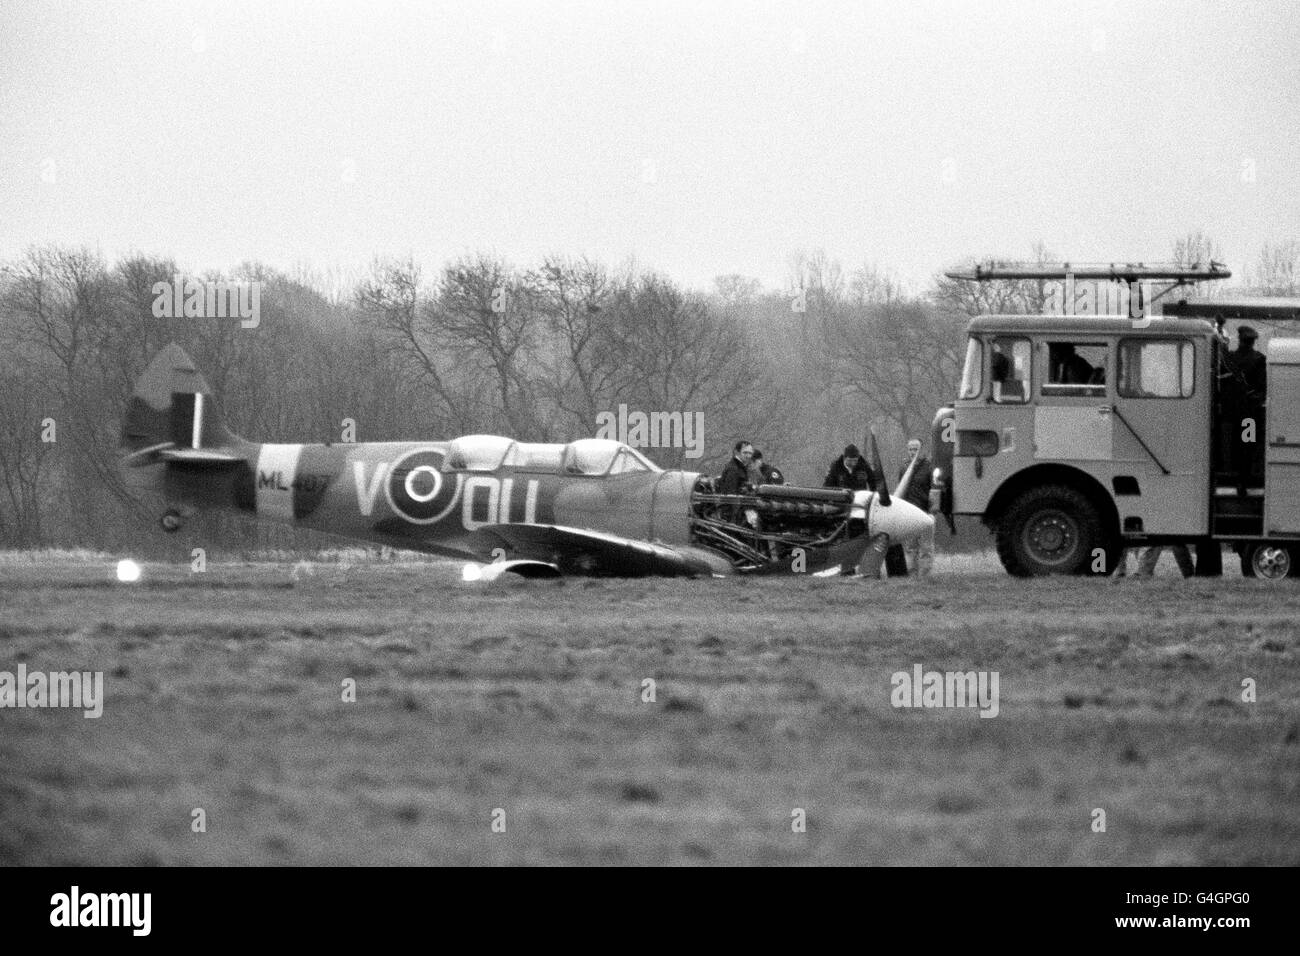 A Spitfire two-seater sits damaged on the runway at Eastleigh Airport after it's undercarriage collapsed. The plane was due to take part in the 50th anniversary celebrations of the Spitfire Stock Photo